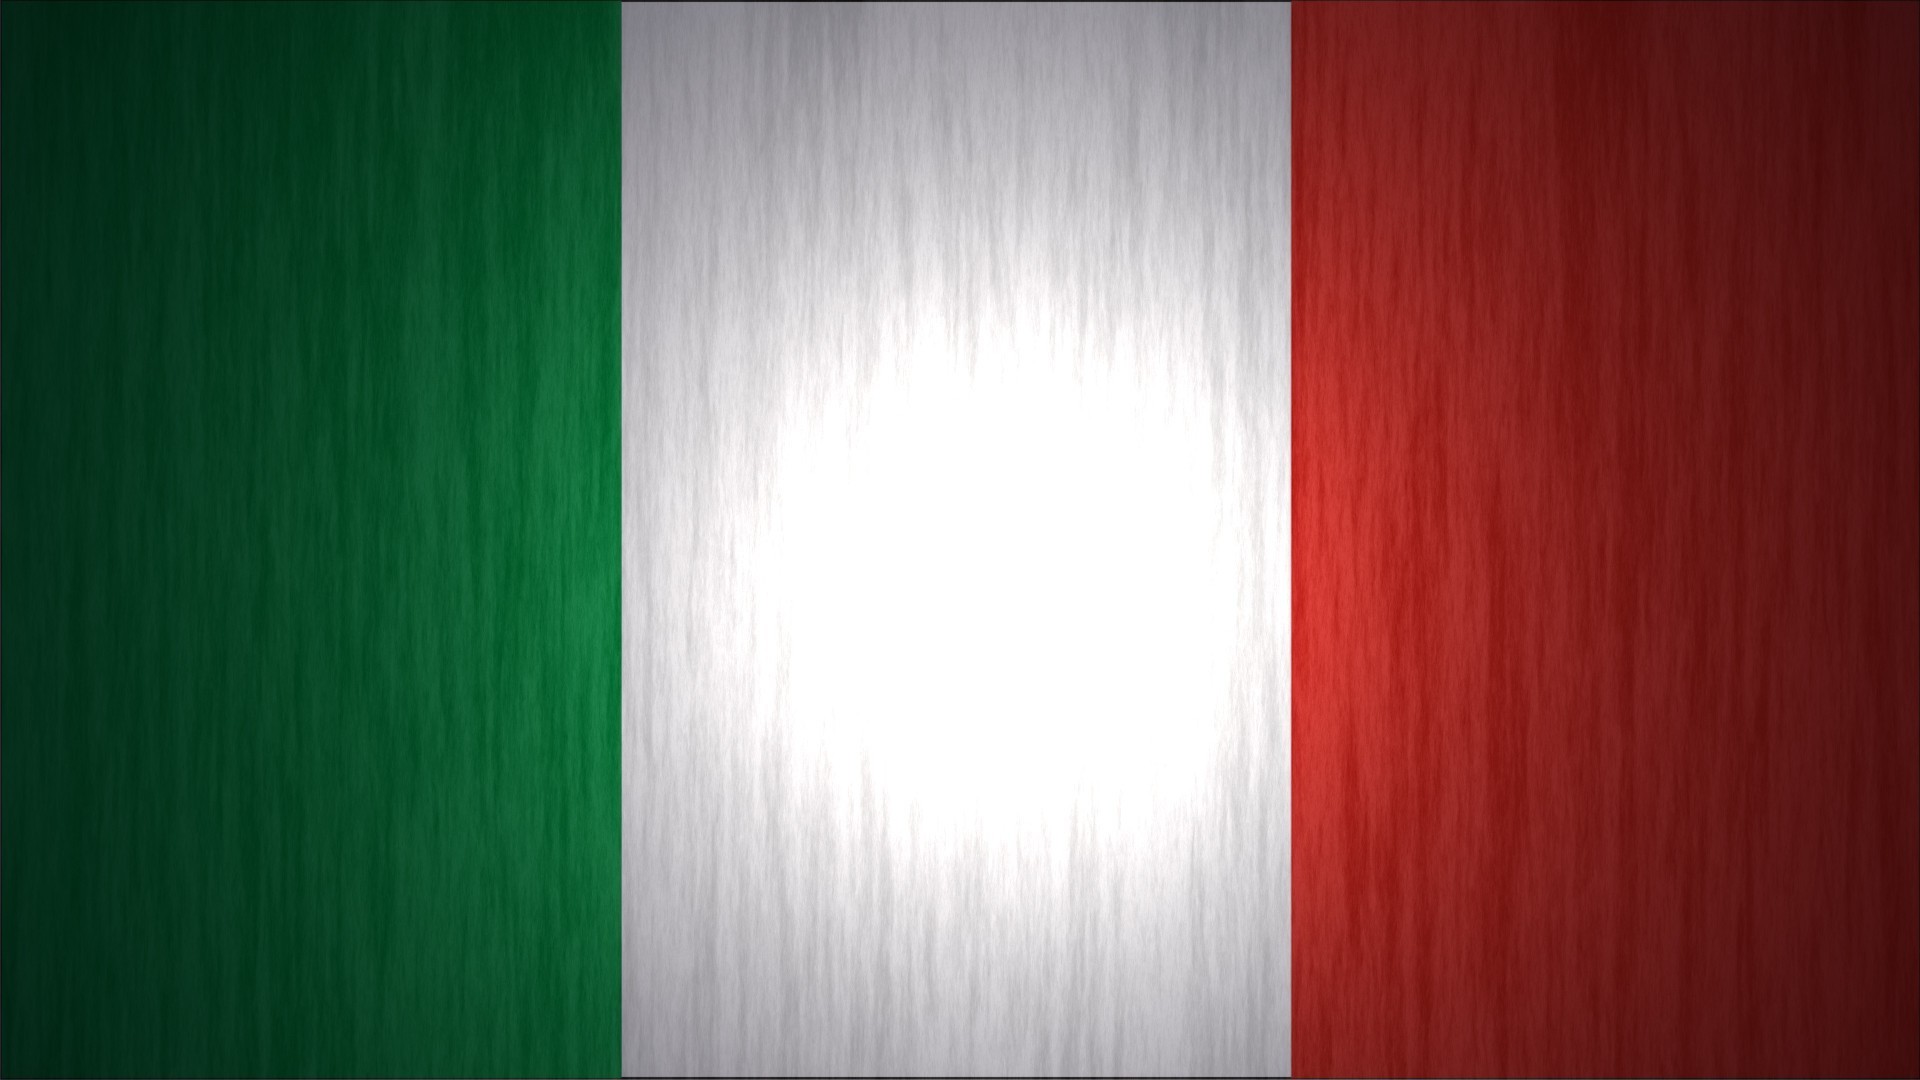 1920x1080  Flags And Countries Mobile Phone Wallpapers 1500Ã—1000 Italian  Flag Images Wallpapers (27 Wallpapers) | Adorable Wallpapers | Desktop |  Pinterest ...